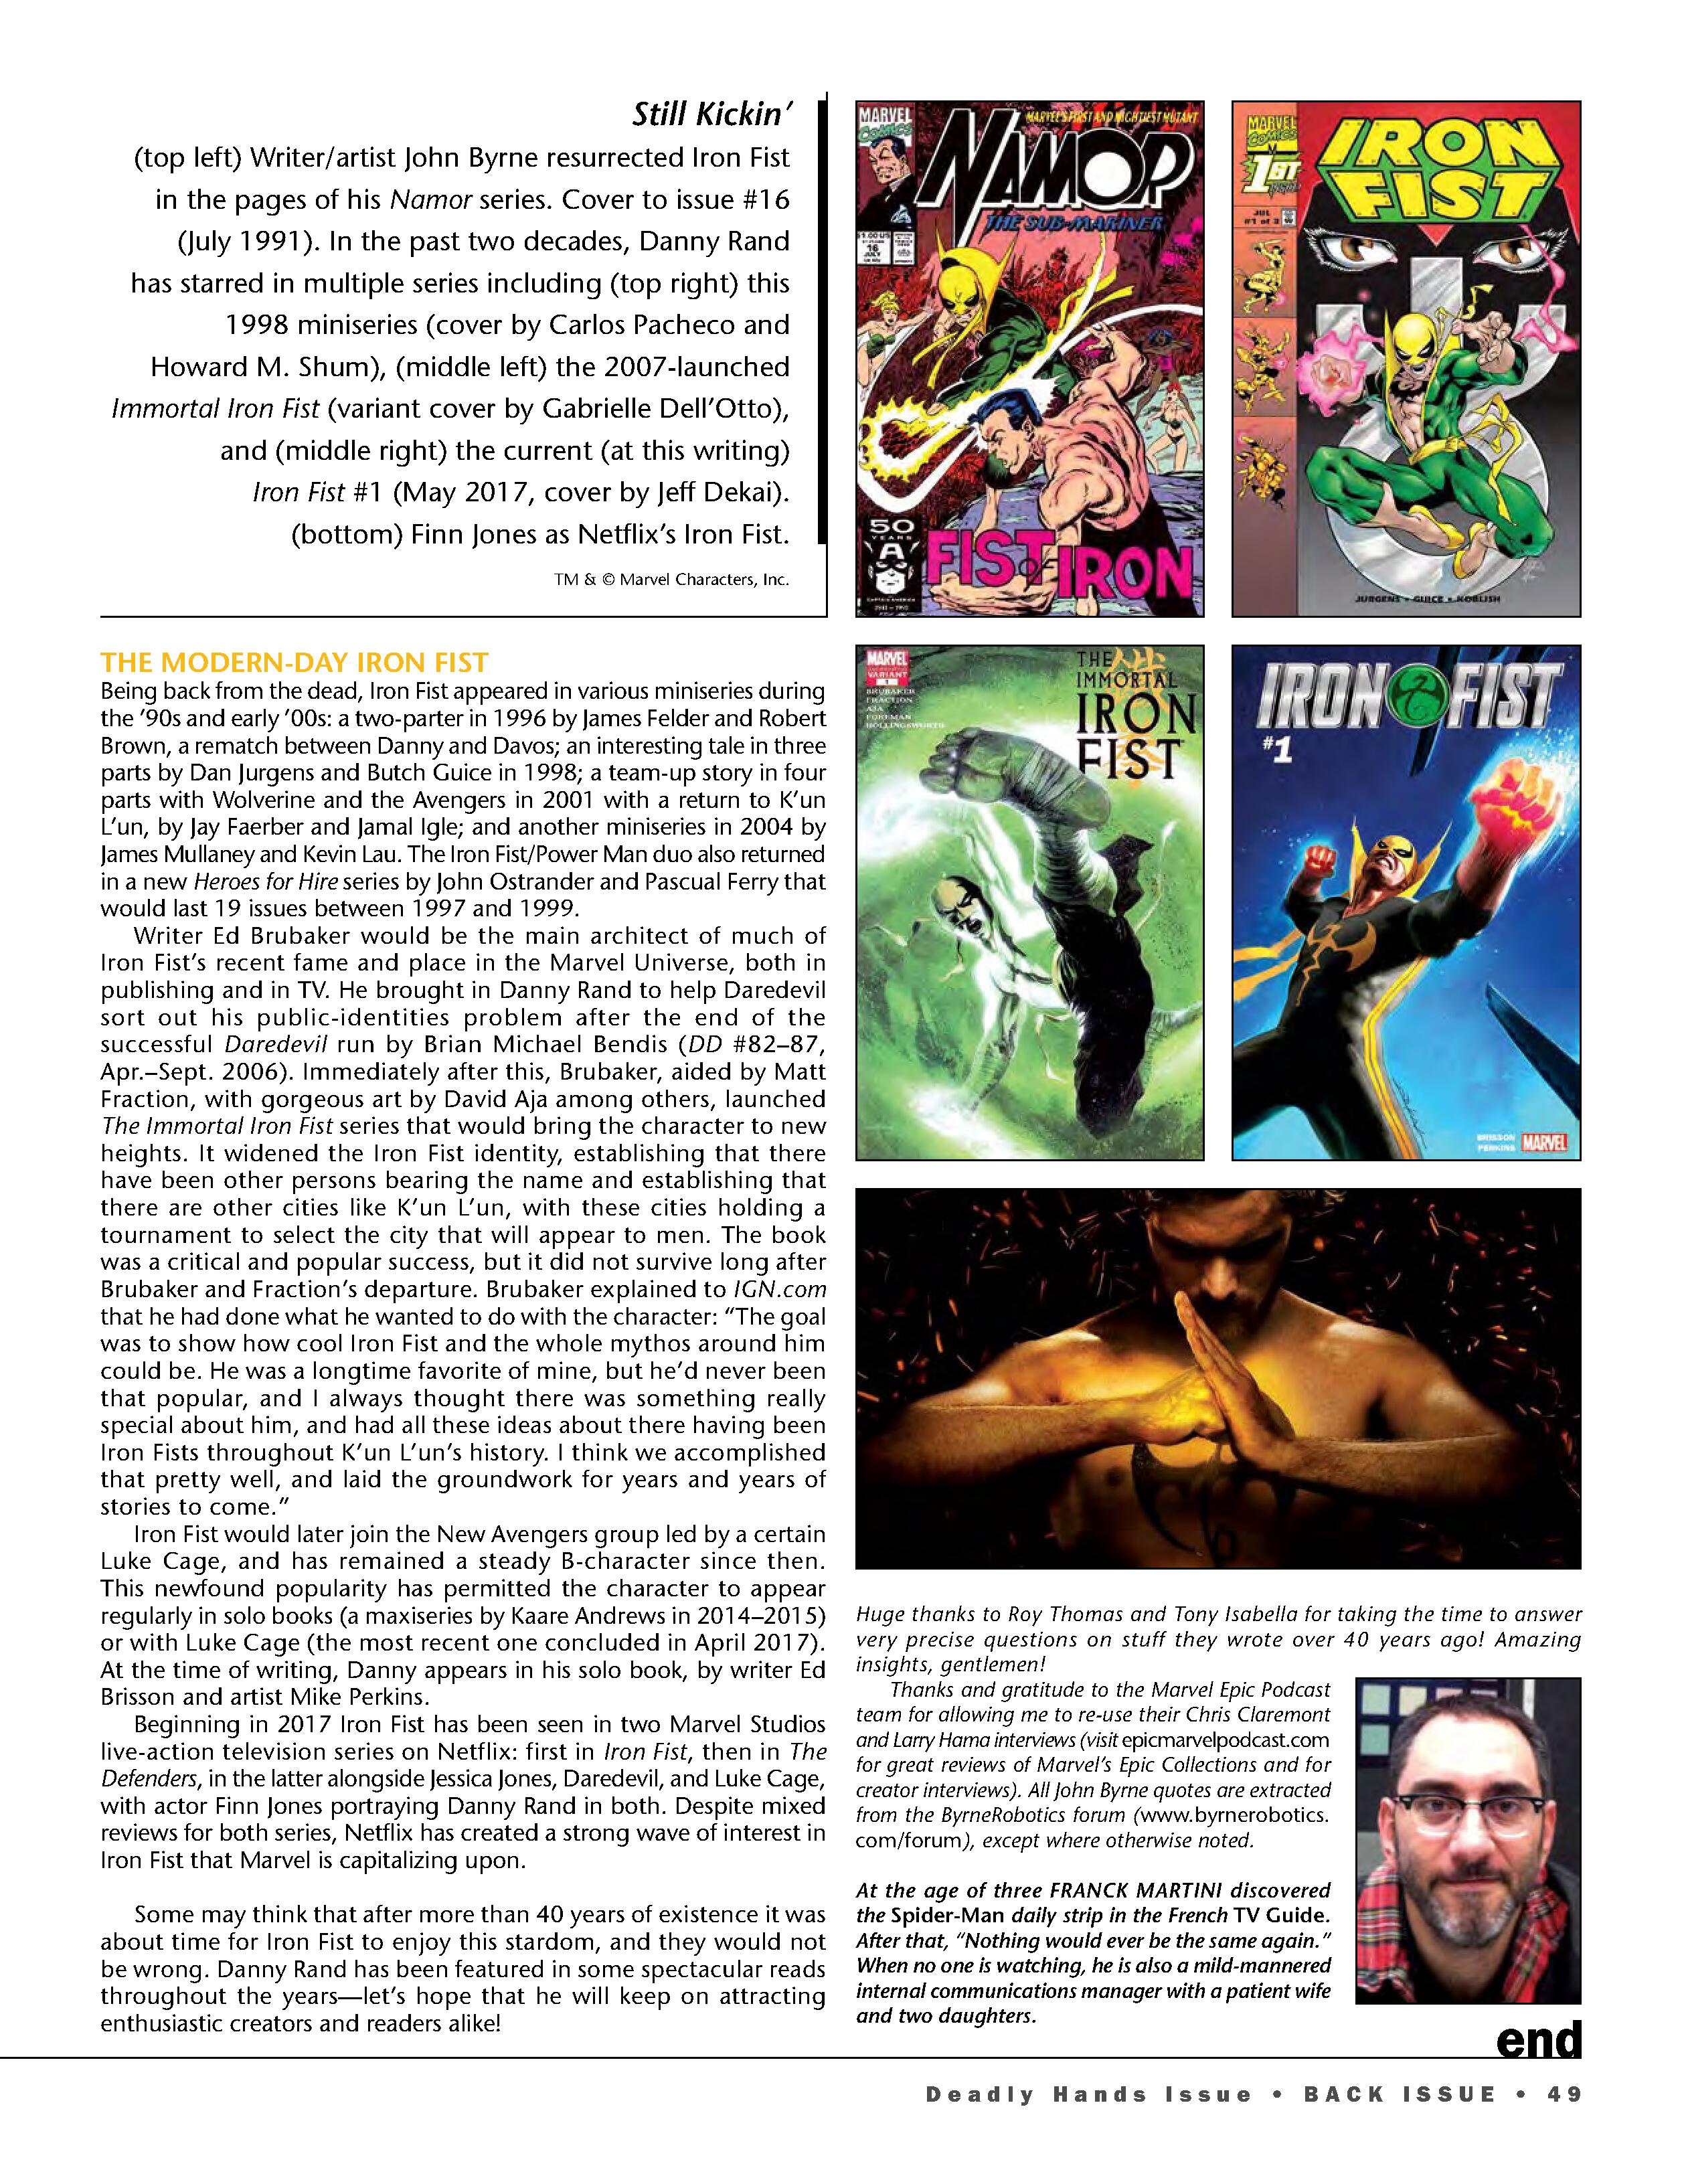 Read online Back Issue comic -  Issue #105 - 51